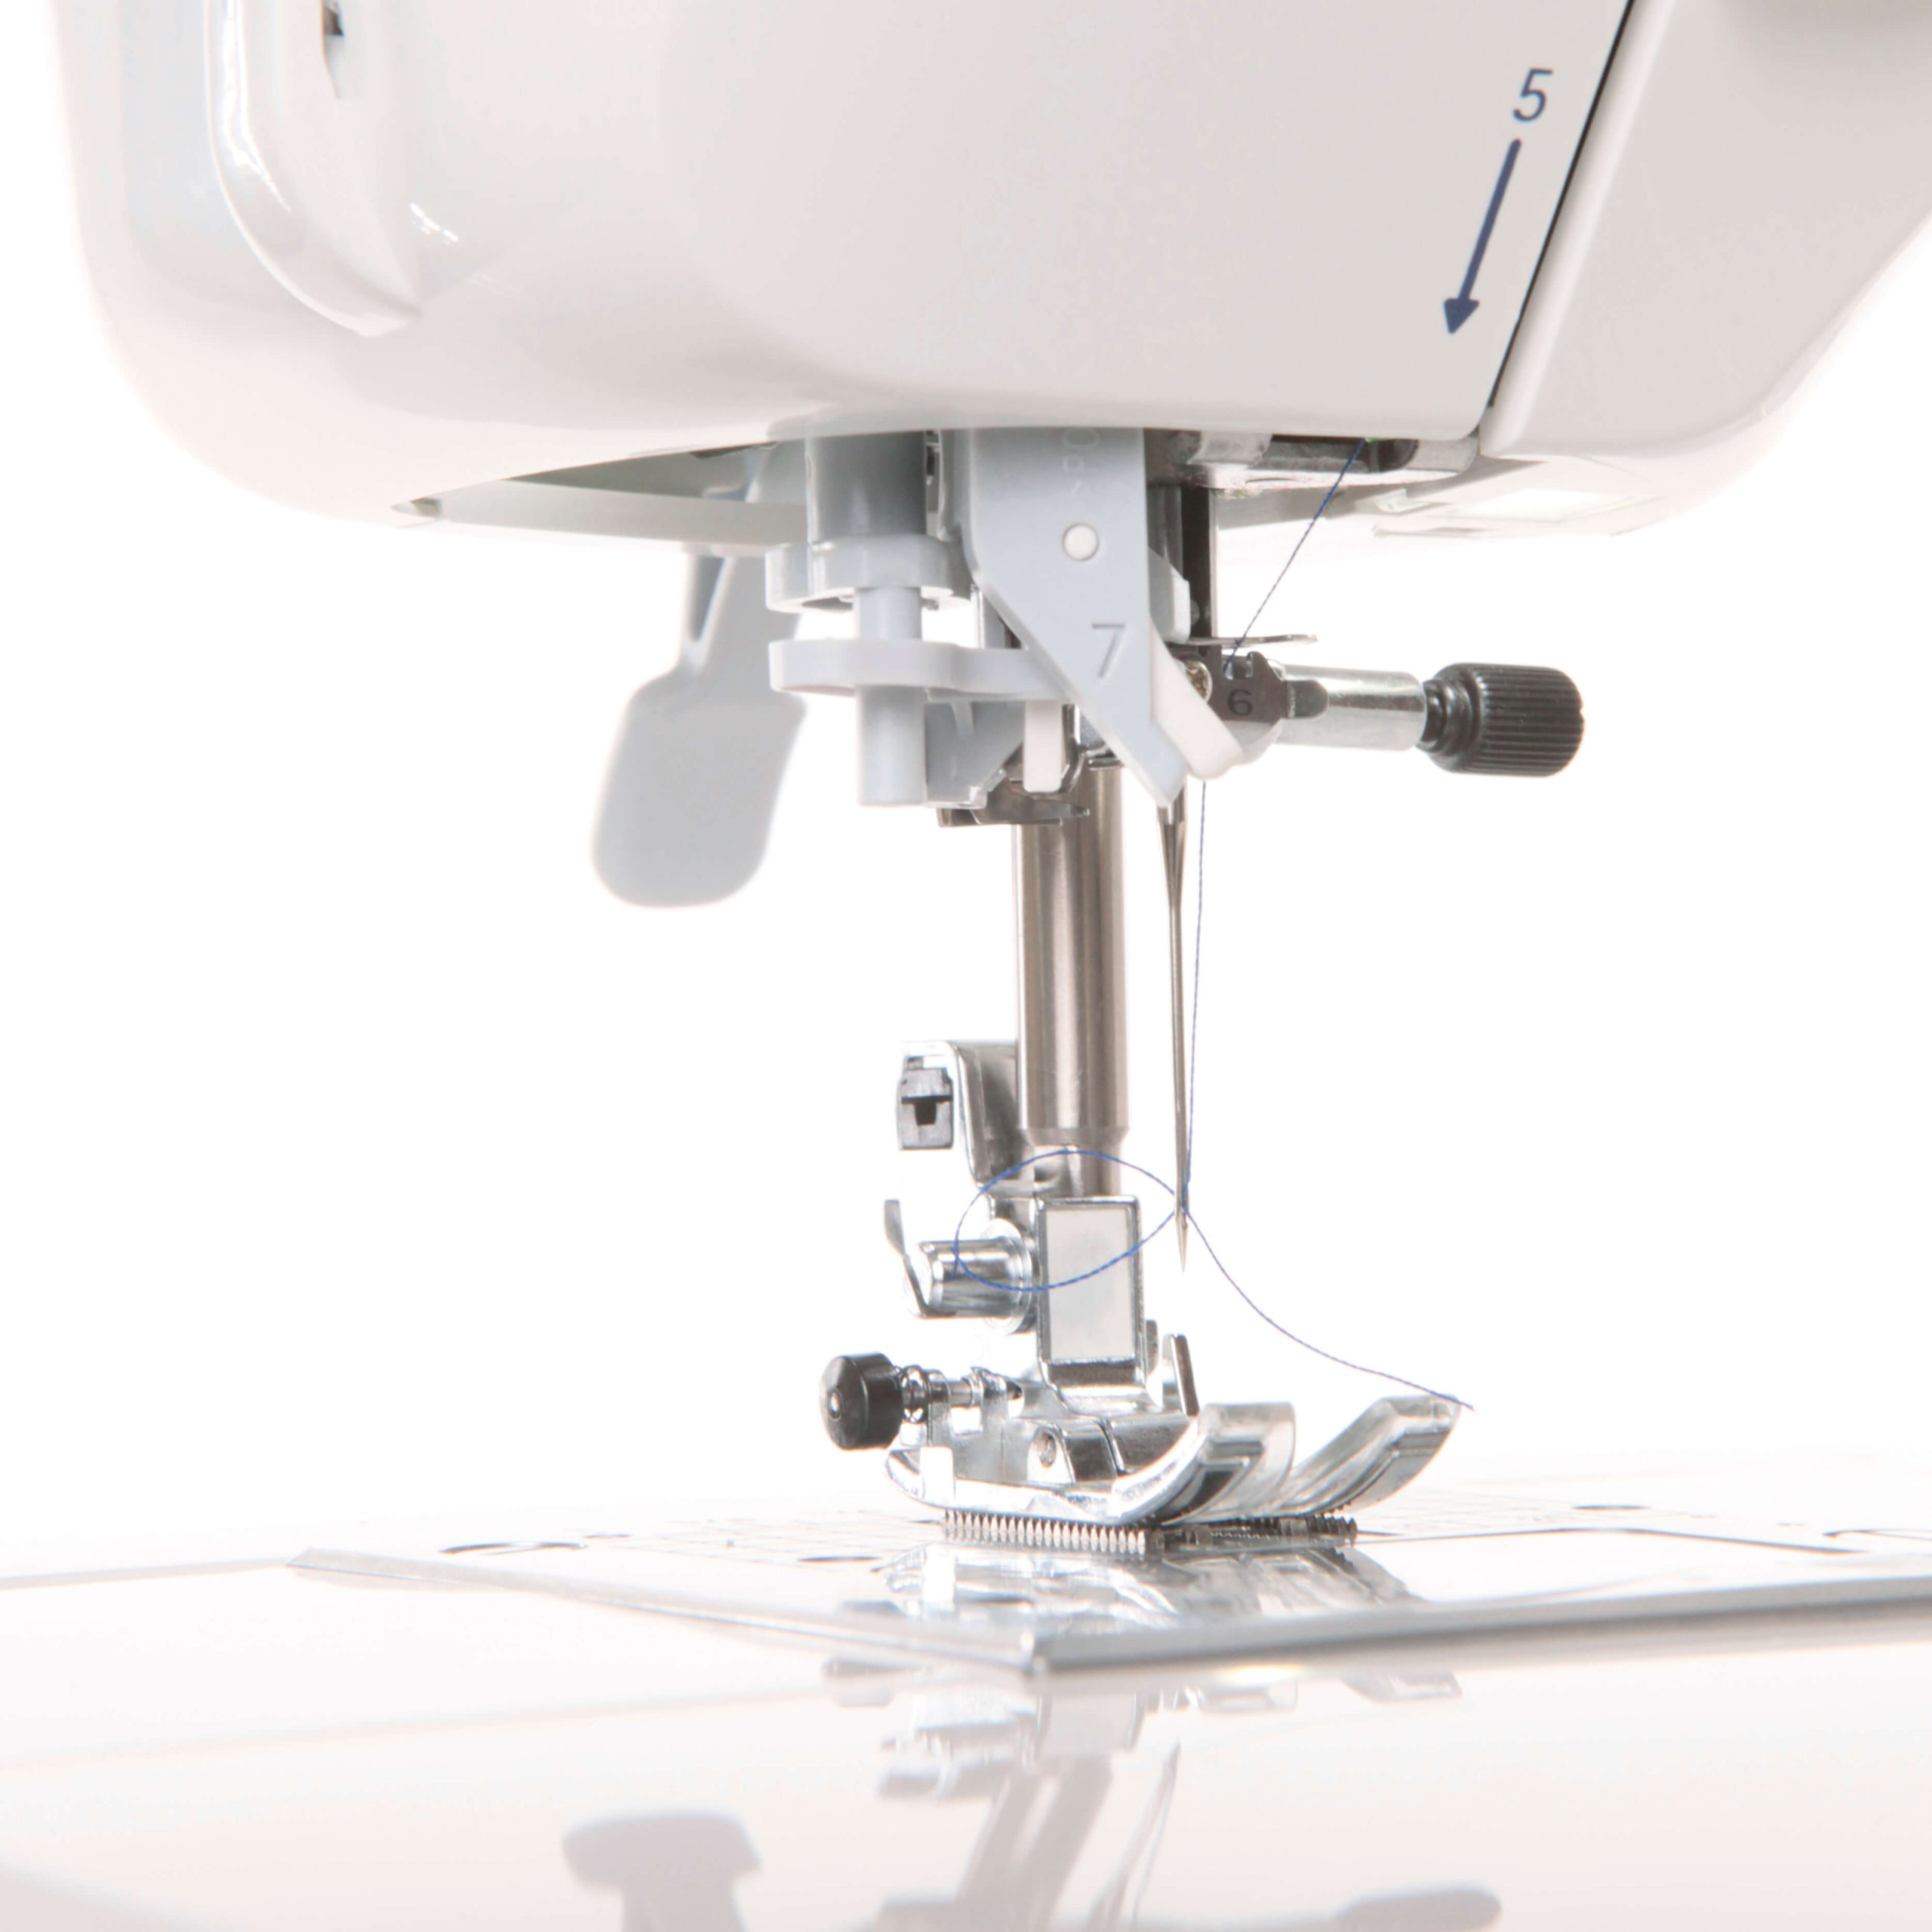 Juki HZL-F300 Computerized Quilting and Sewing Machine